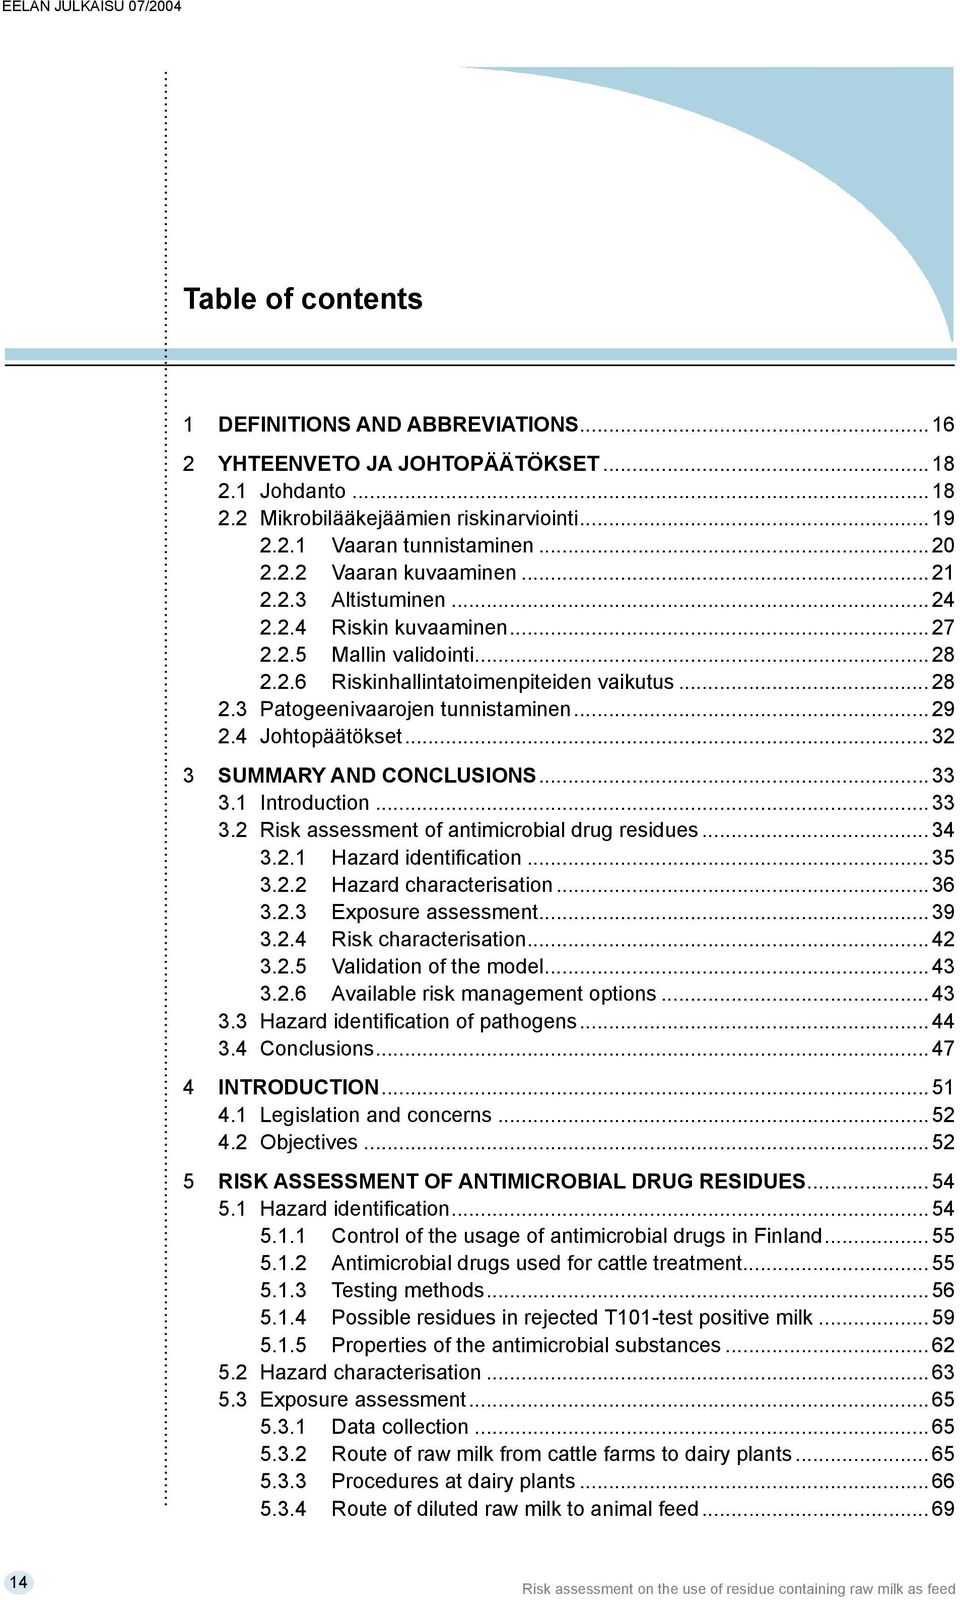 ..32 3 SUMMARY AND CONCLUSIONS...33 3.1 Introduction...33 3.2 Risk assessment of antimicrobial drug residues...34 3.2.1 Hazard identification...35 3.2.2 Hazard characterisation...36 3.2.3 Exposure assessment.